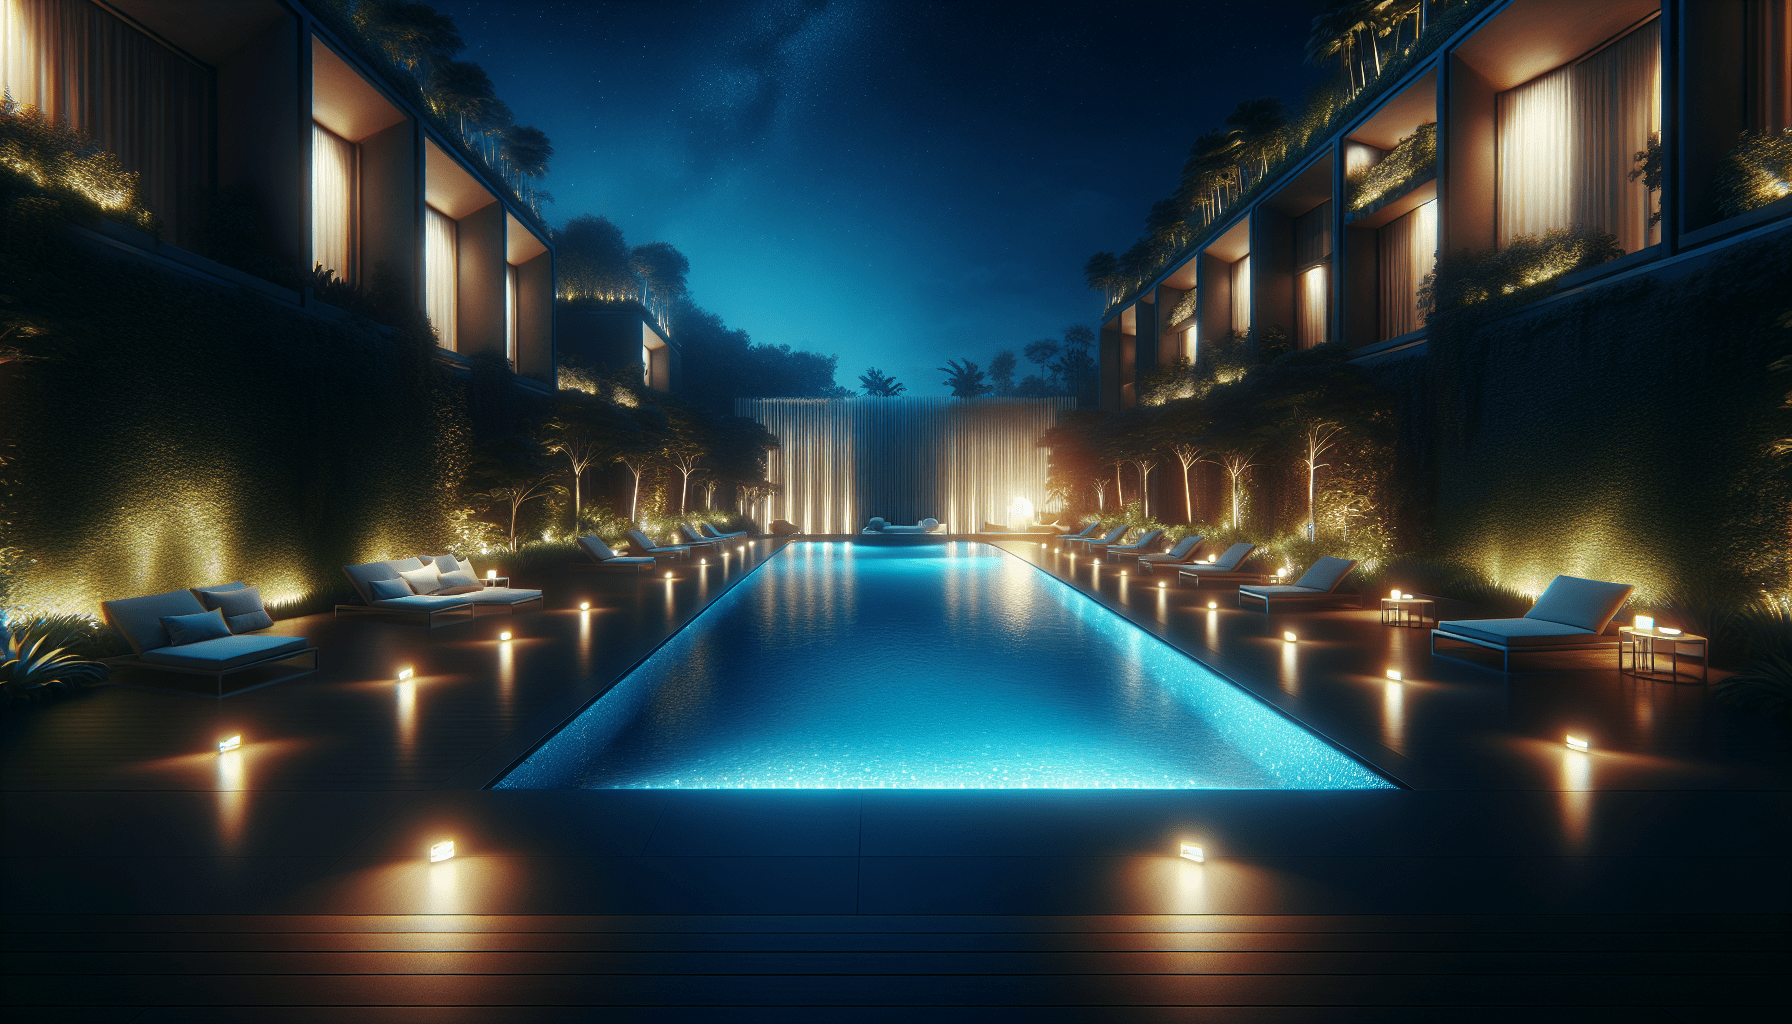 What are the benefits of adding lighting to my swimming pool?